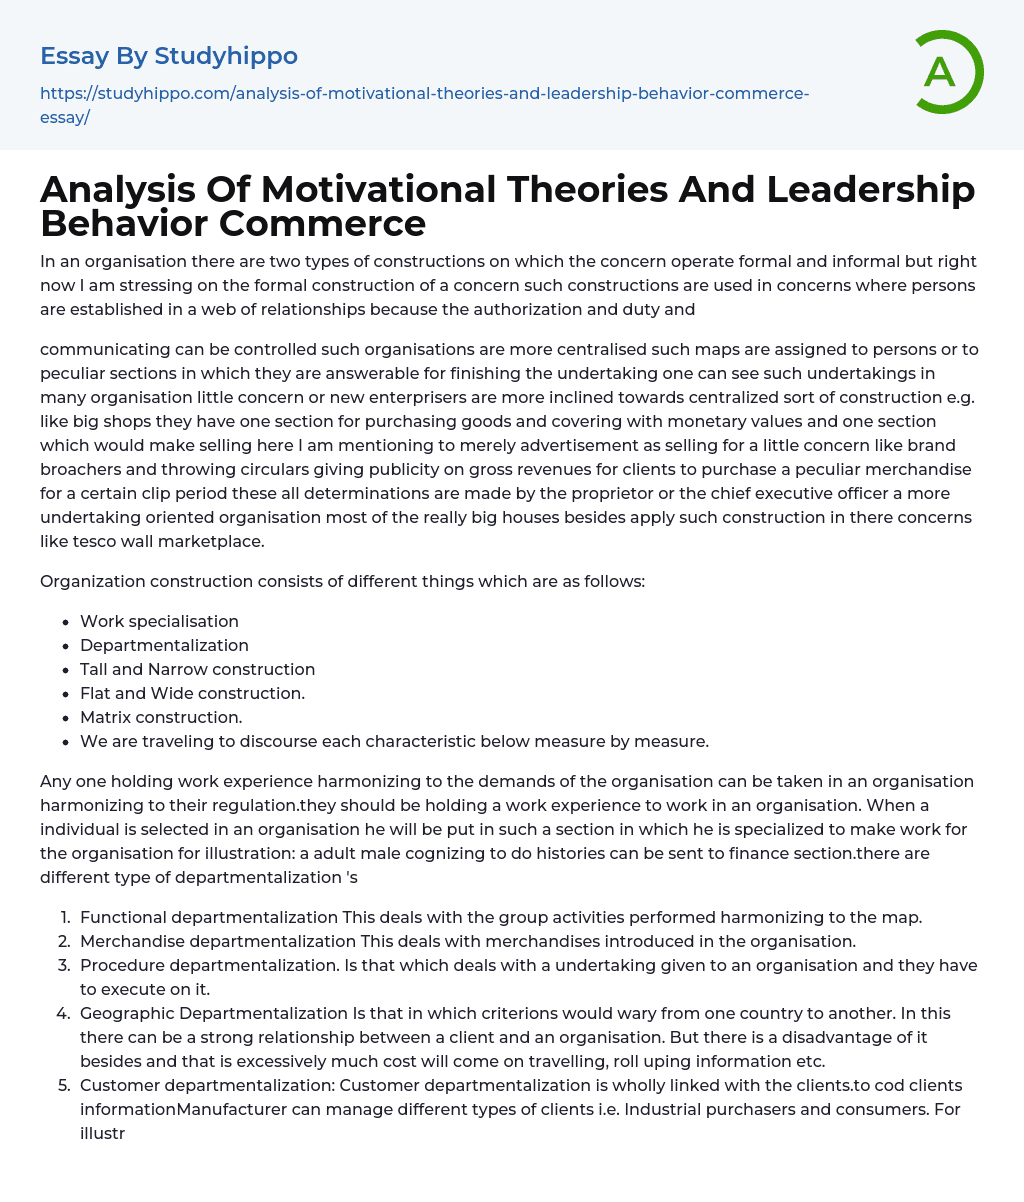 Analysis Of Motivational Theories And Leadership Behavior Commerce Essay Example